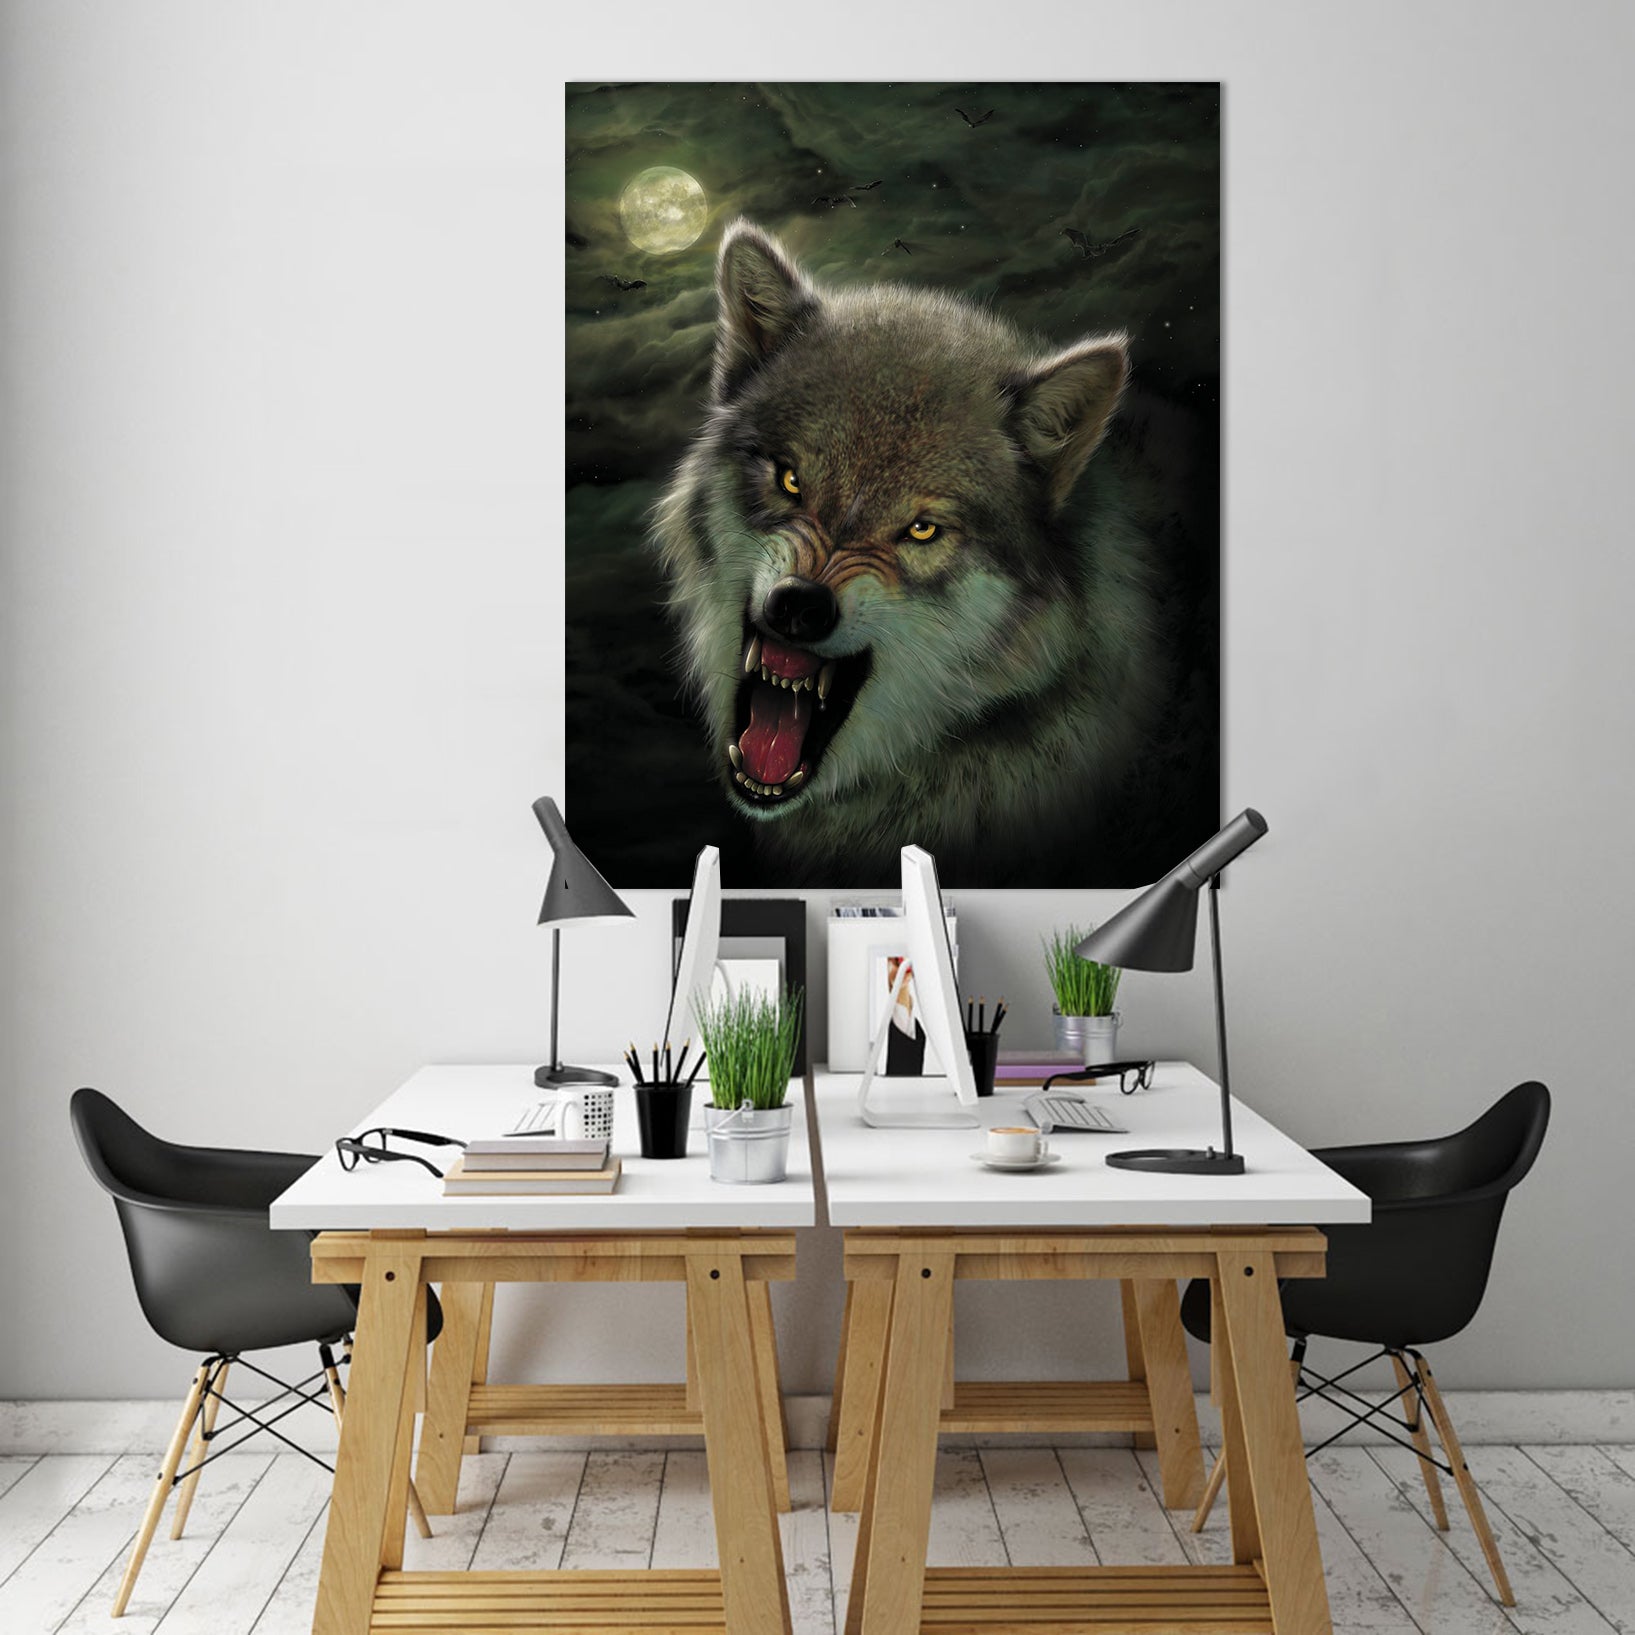 3D Nightbreed 056 Vincent Hie Wall Sticker